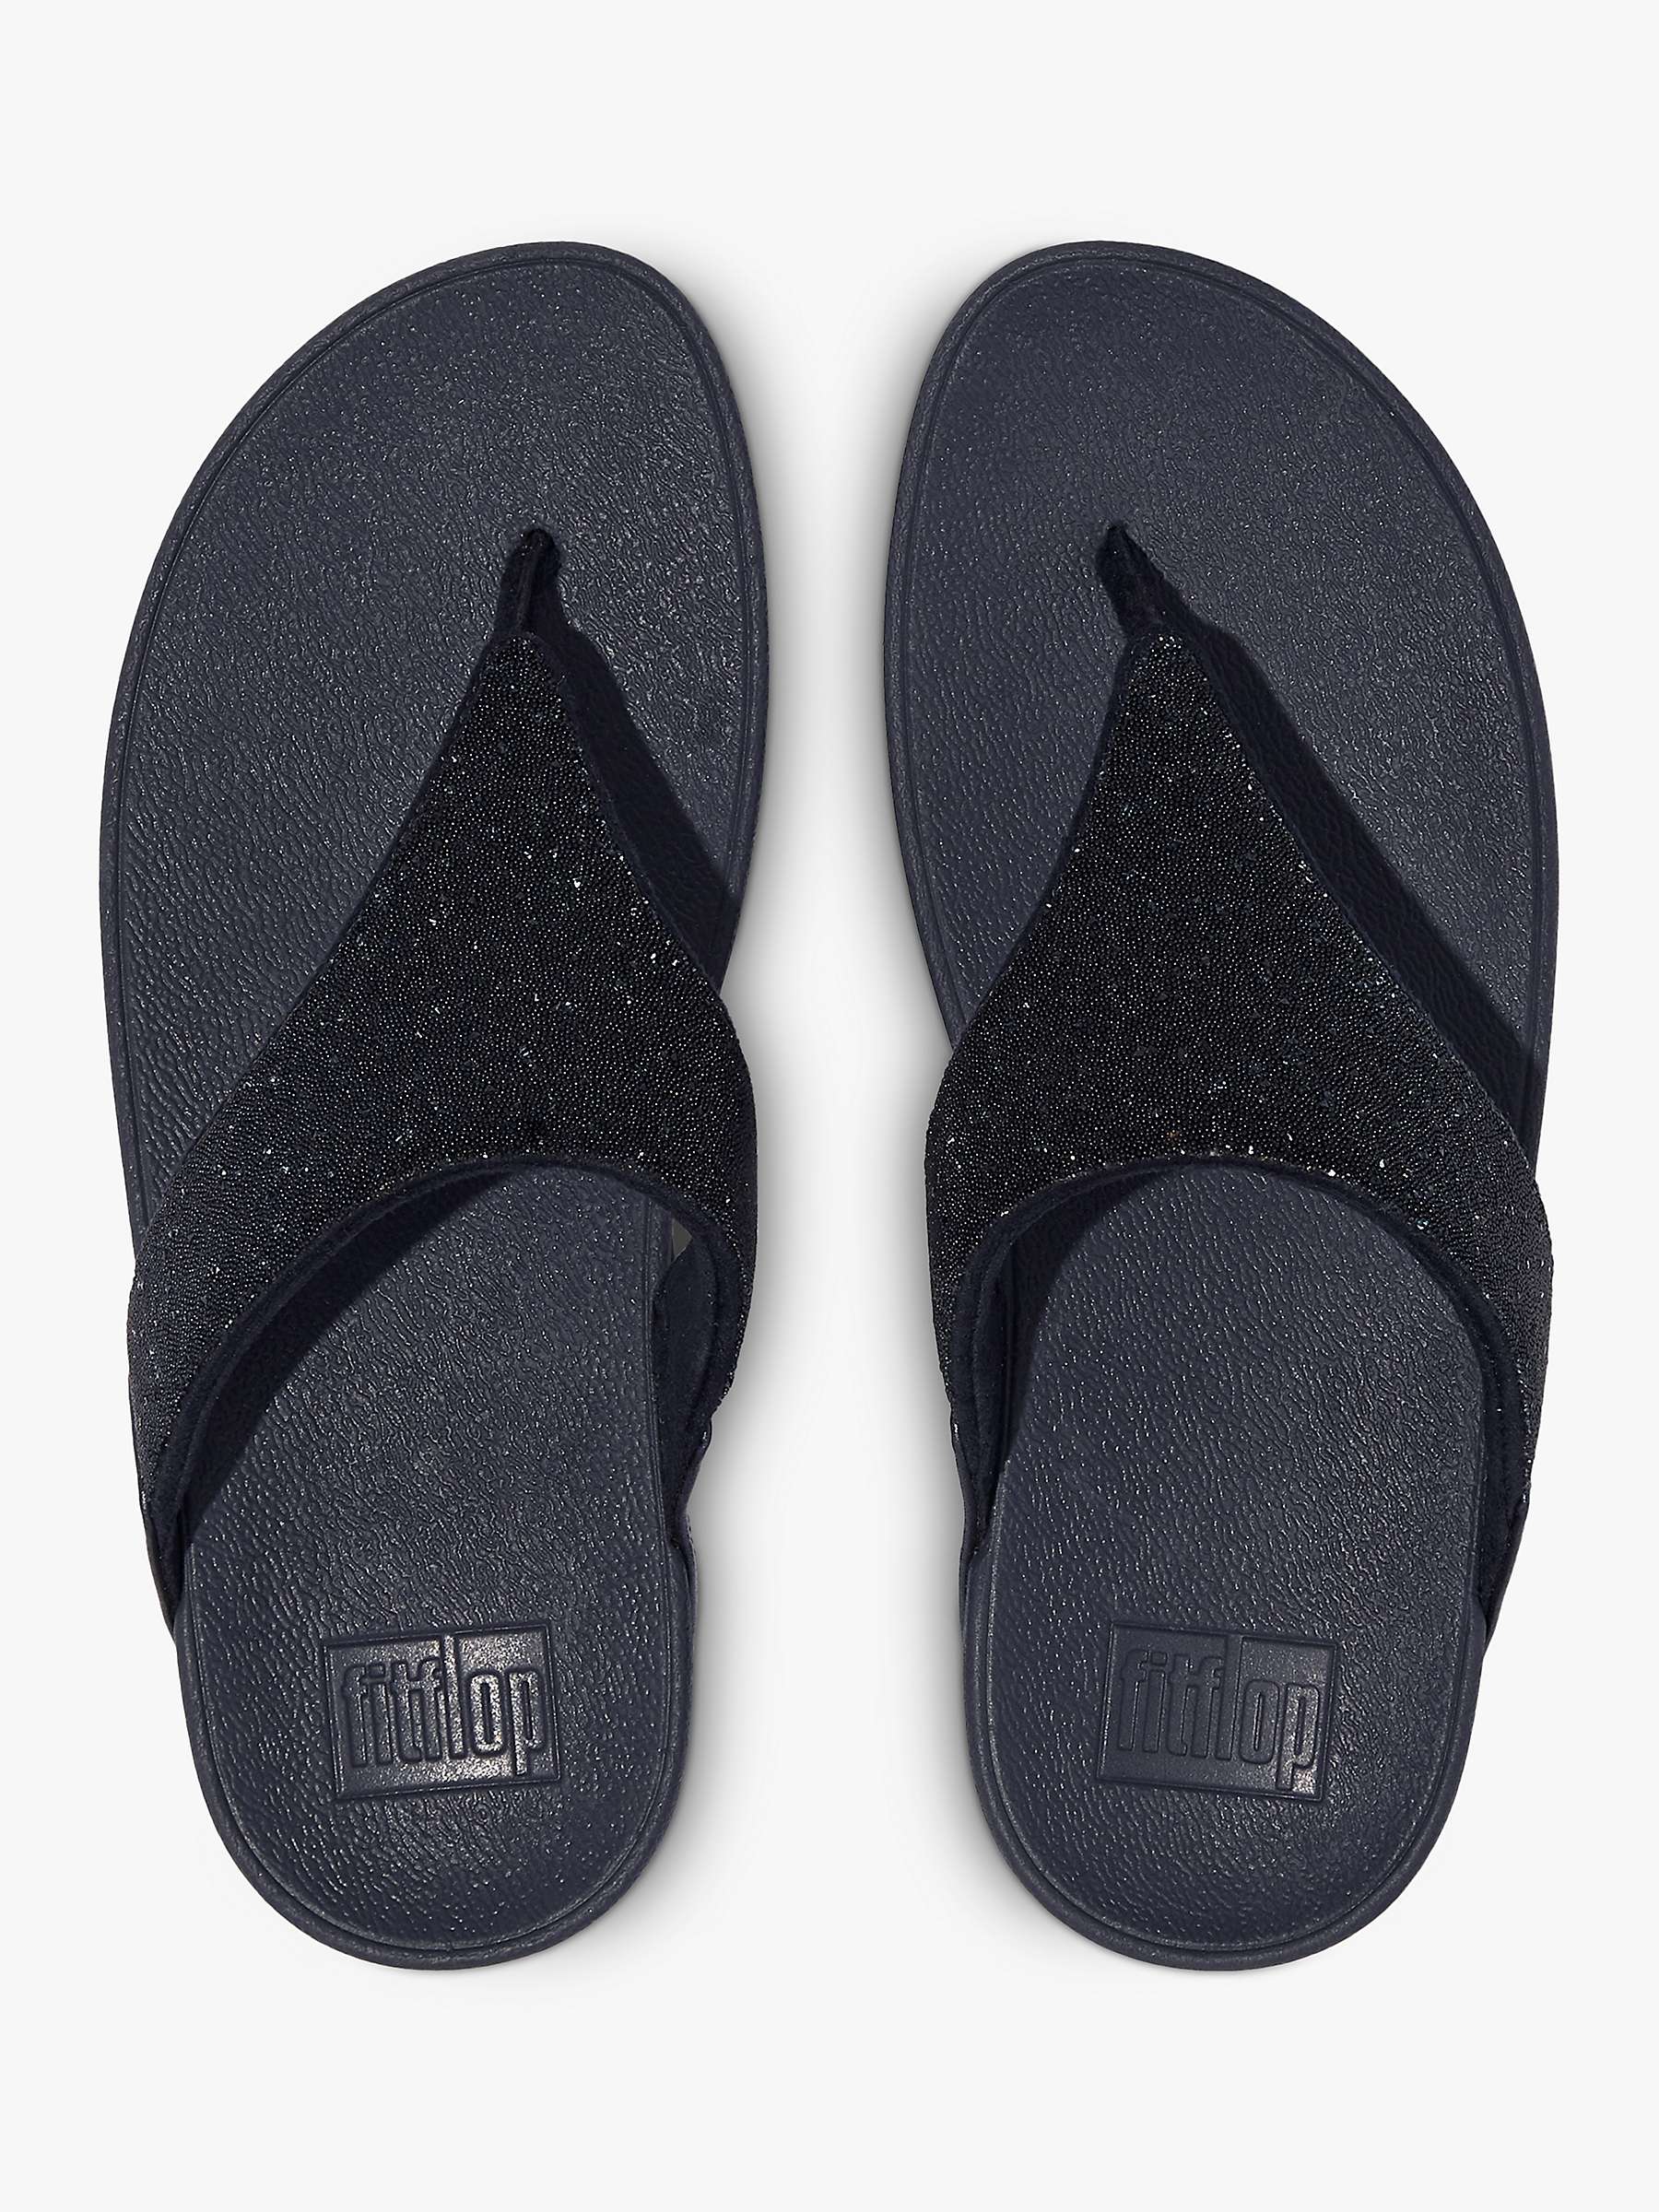 Buy FitFlop Lulu Toe Post Crystal and Bead Slider Sandals, Midnight Navy Online at johnlewis.com